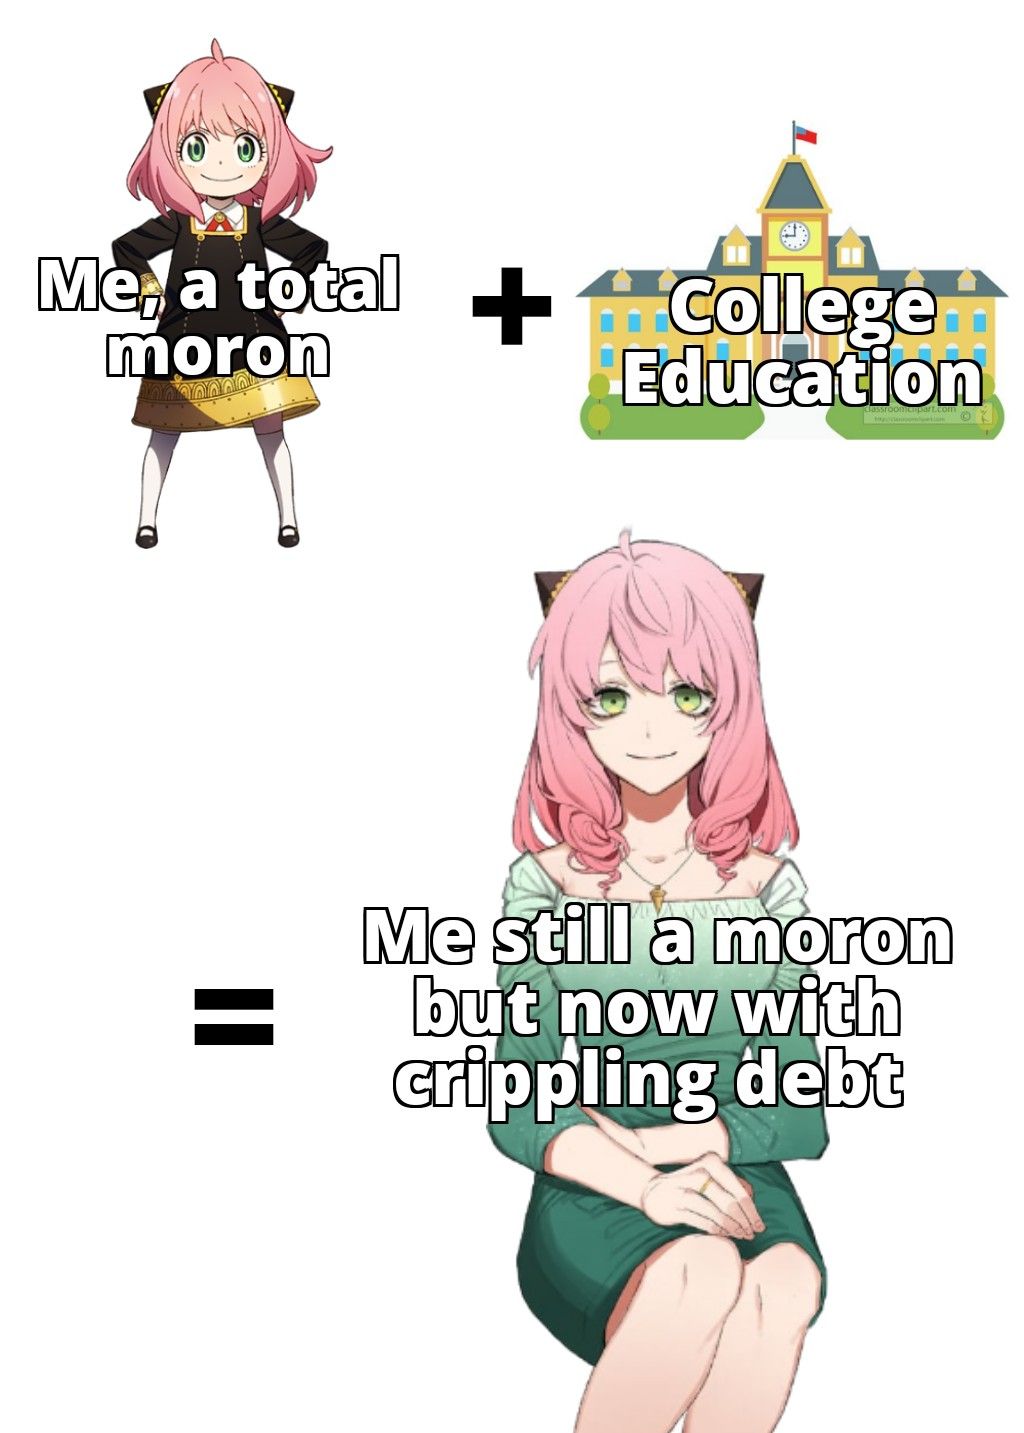 But now my education can open doors for me now right? ...right?